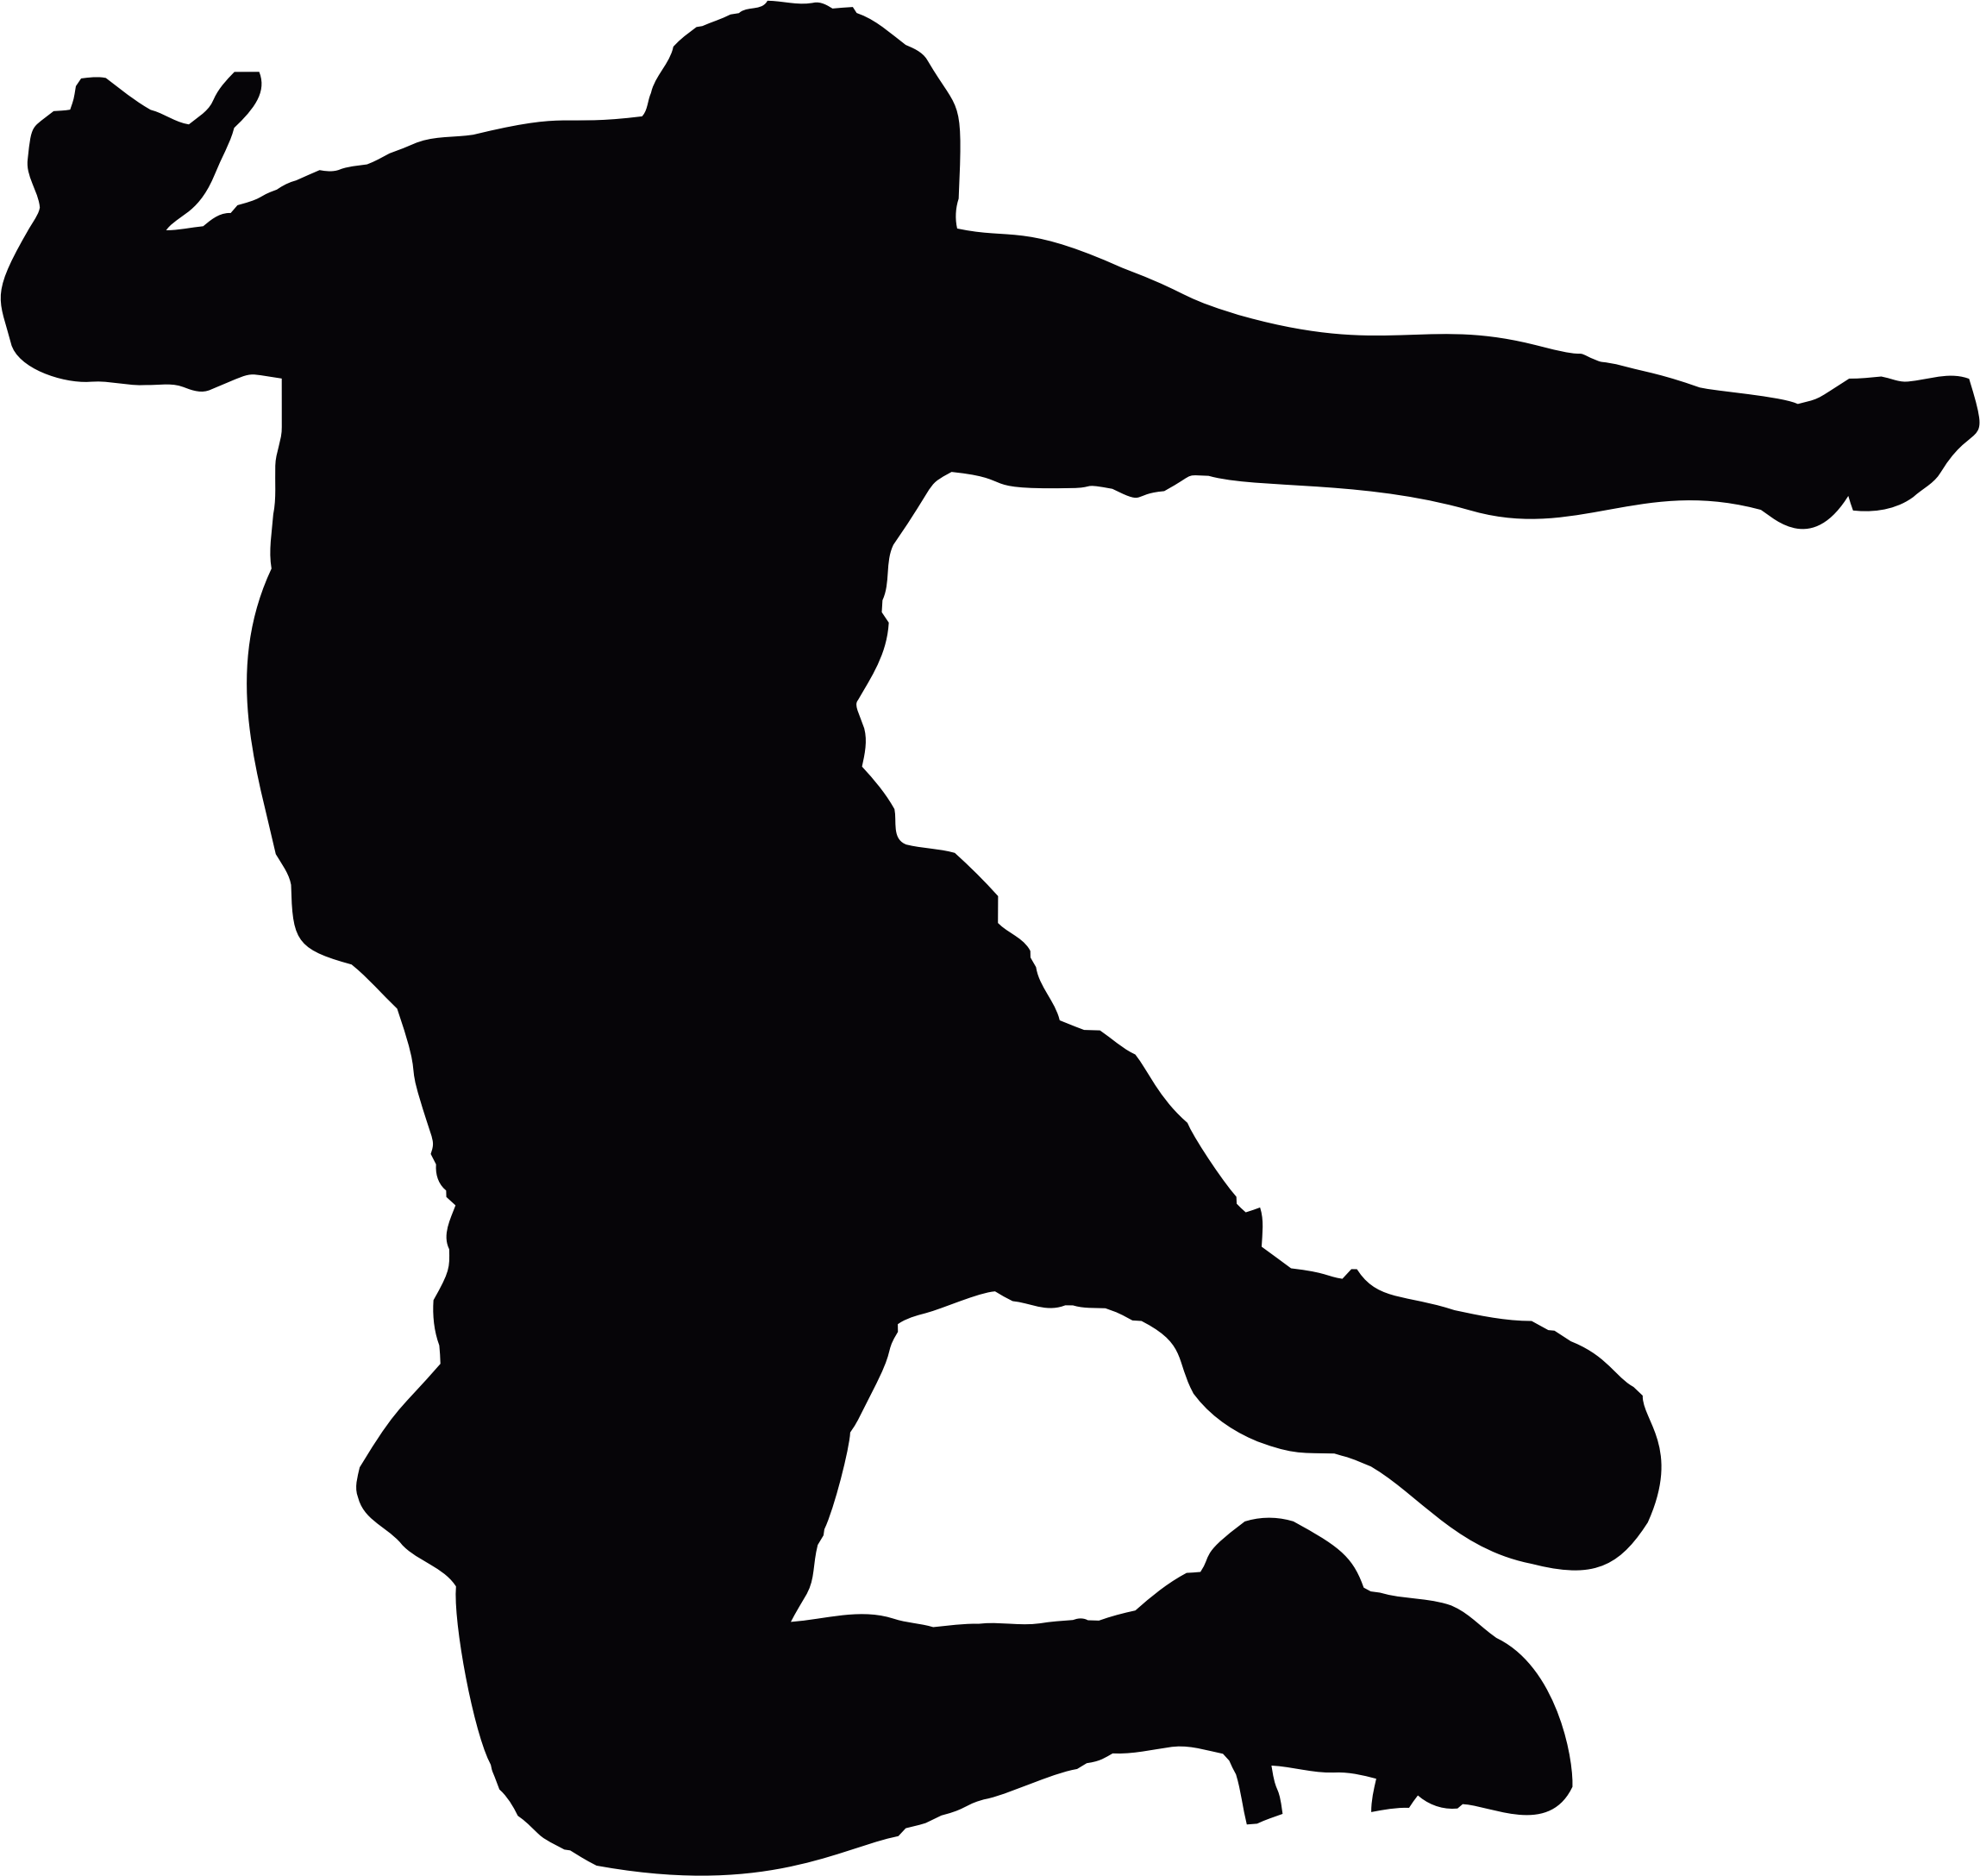 Man big image png. Jumping clipart silhouette